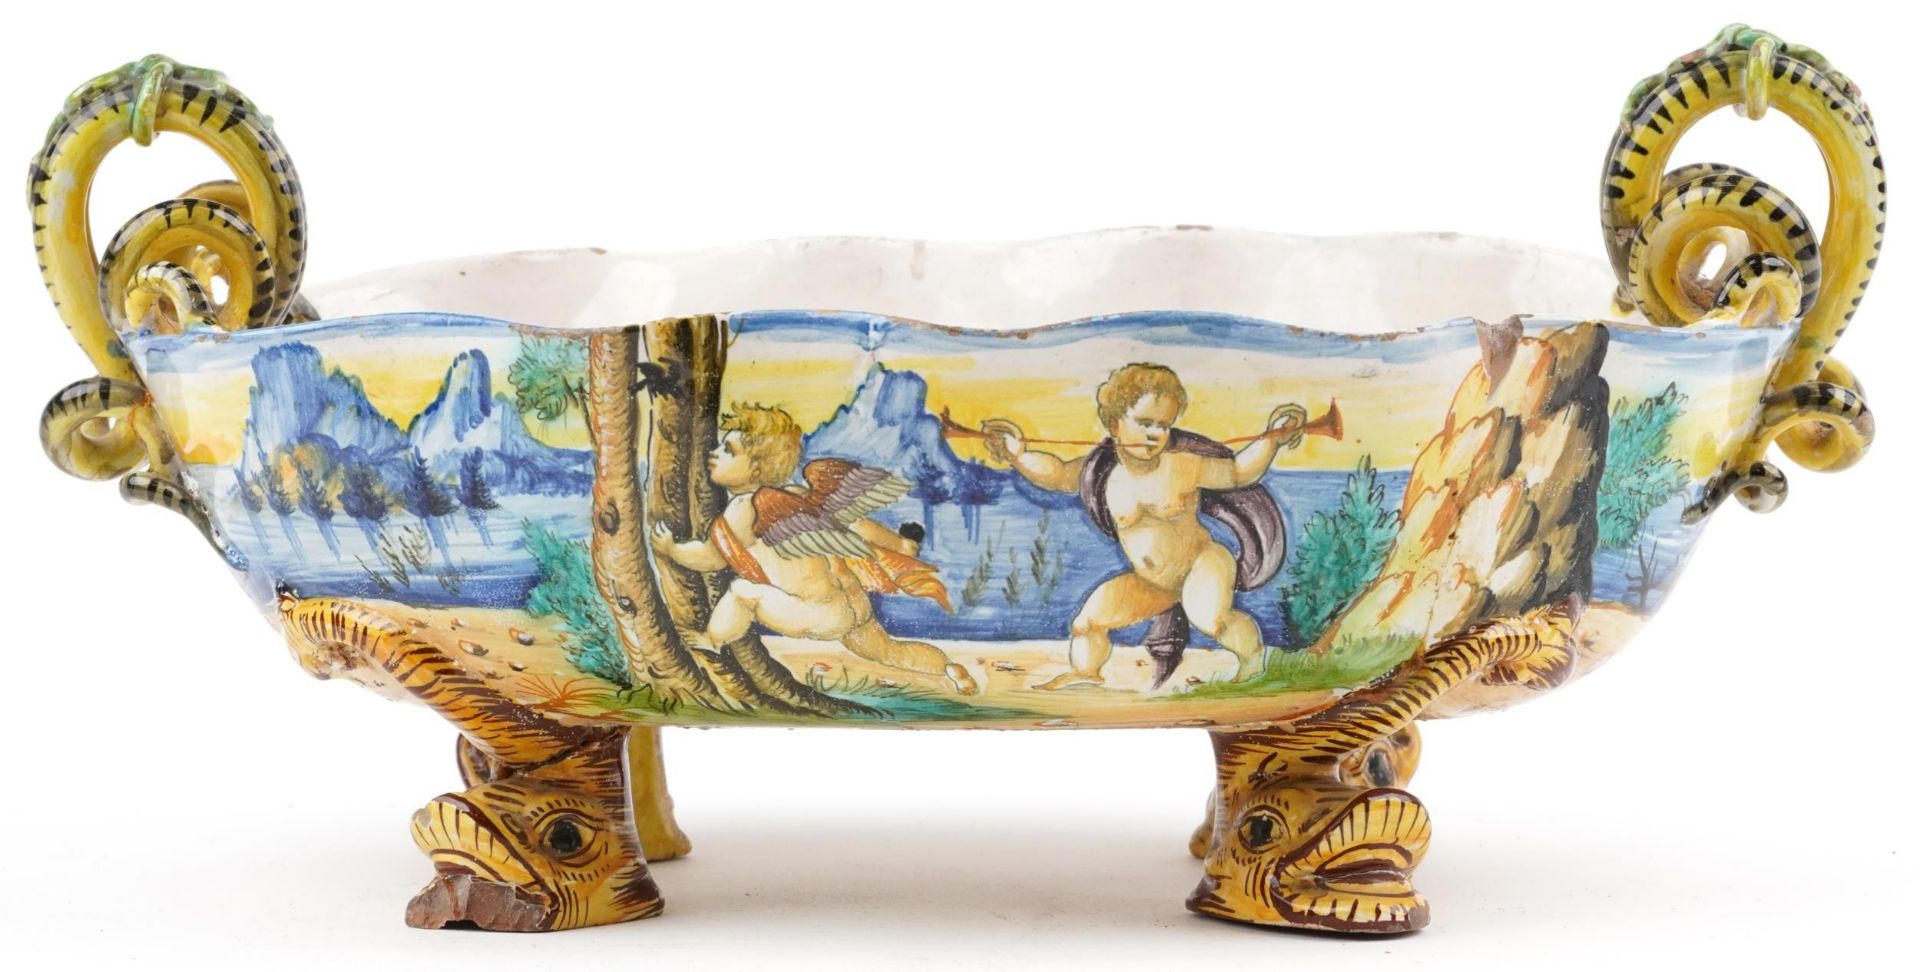 Ulisse Cantagalli, 19th century Italian Maiolica twin handled centre bowl with mythical fish